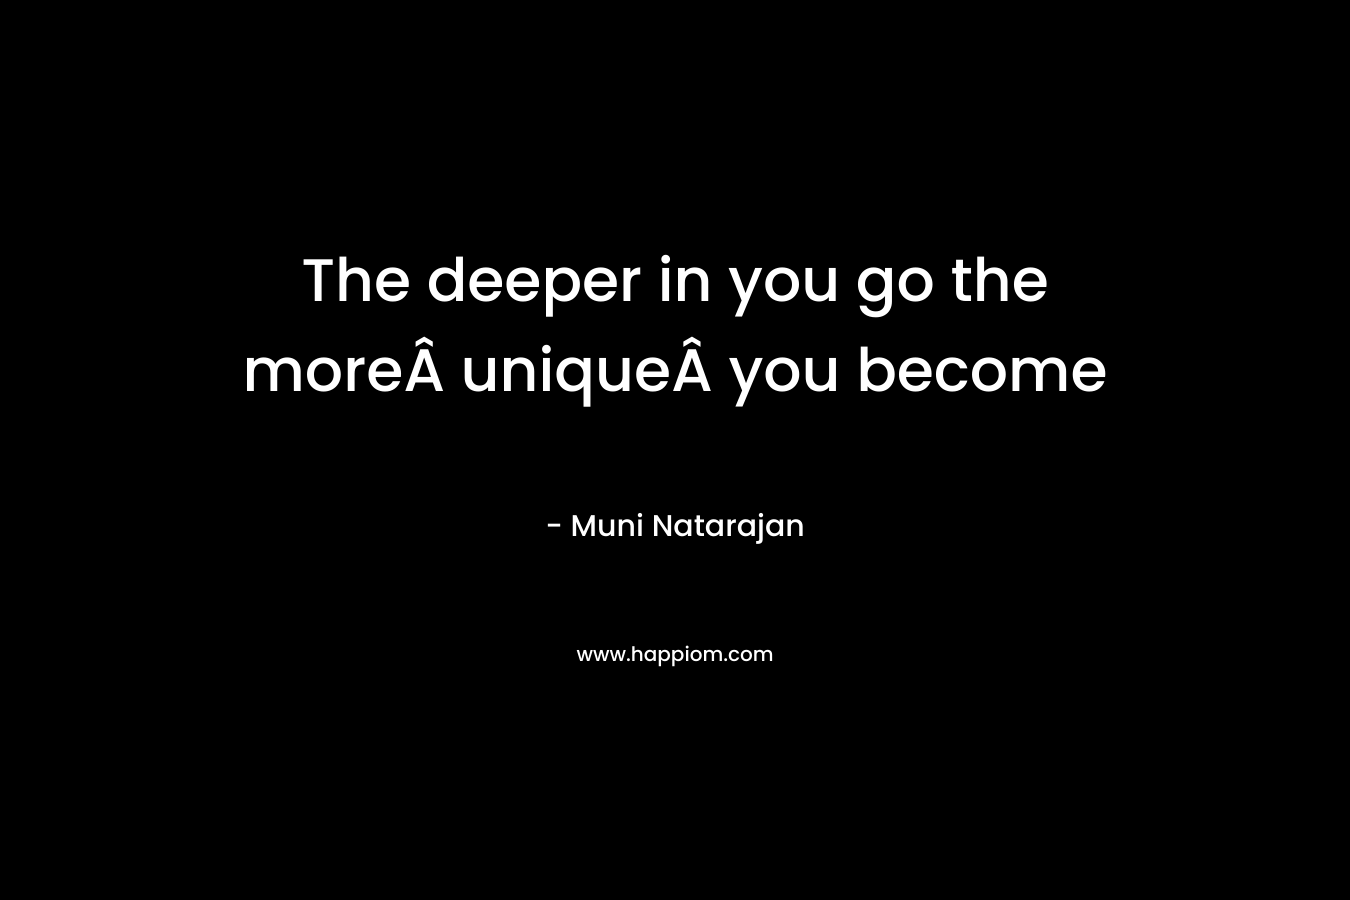 The deeper in you go the moreÂ uniqueÂ you become